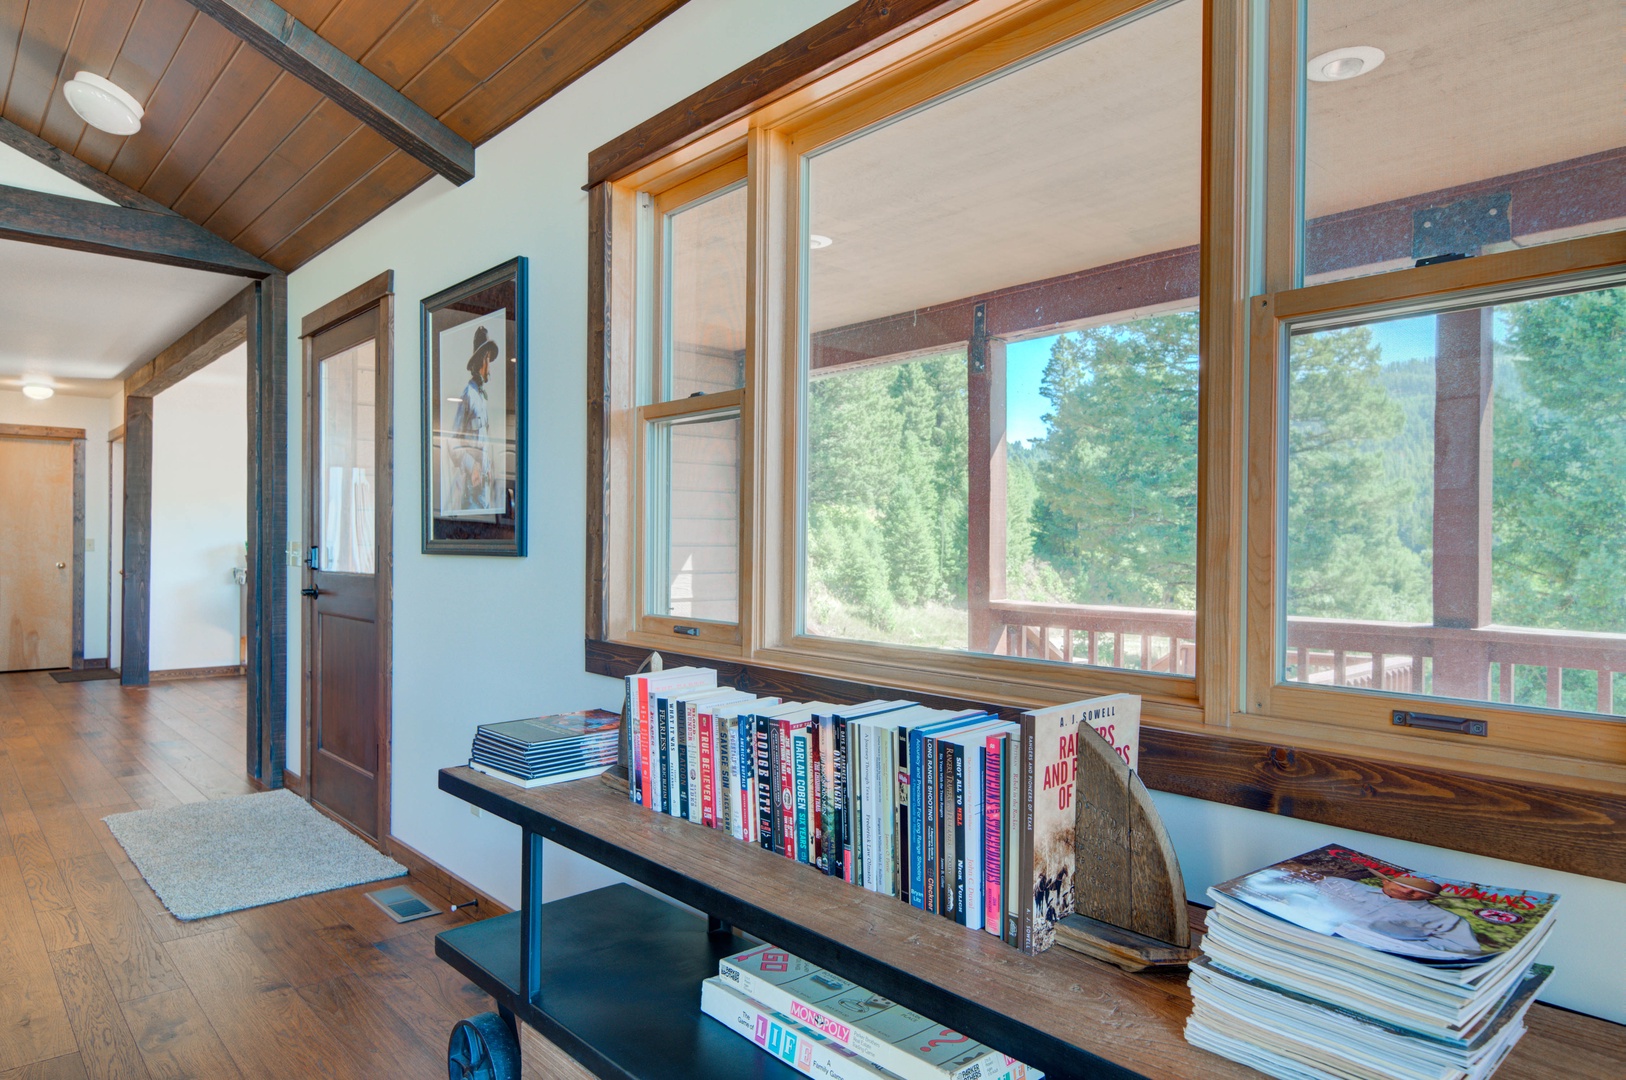 Bozeman Vacation Rentals, The Canyon Lookout - And even a cozy reading nook!